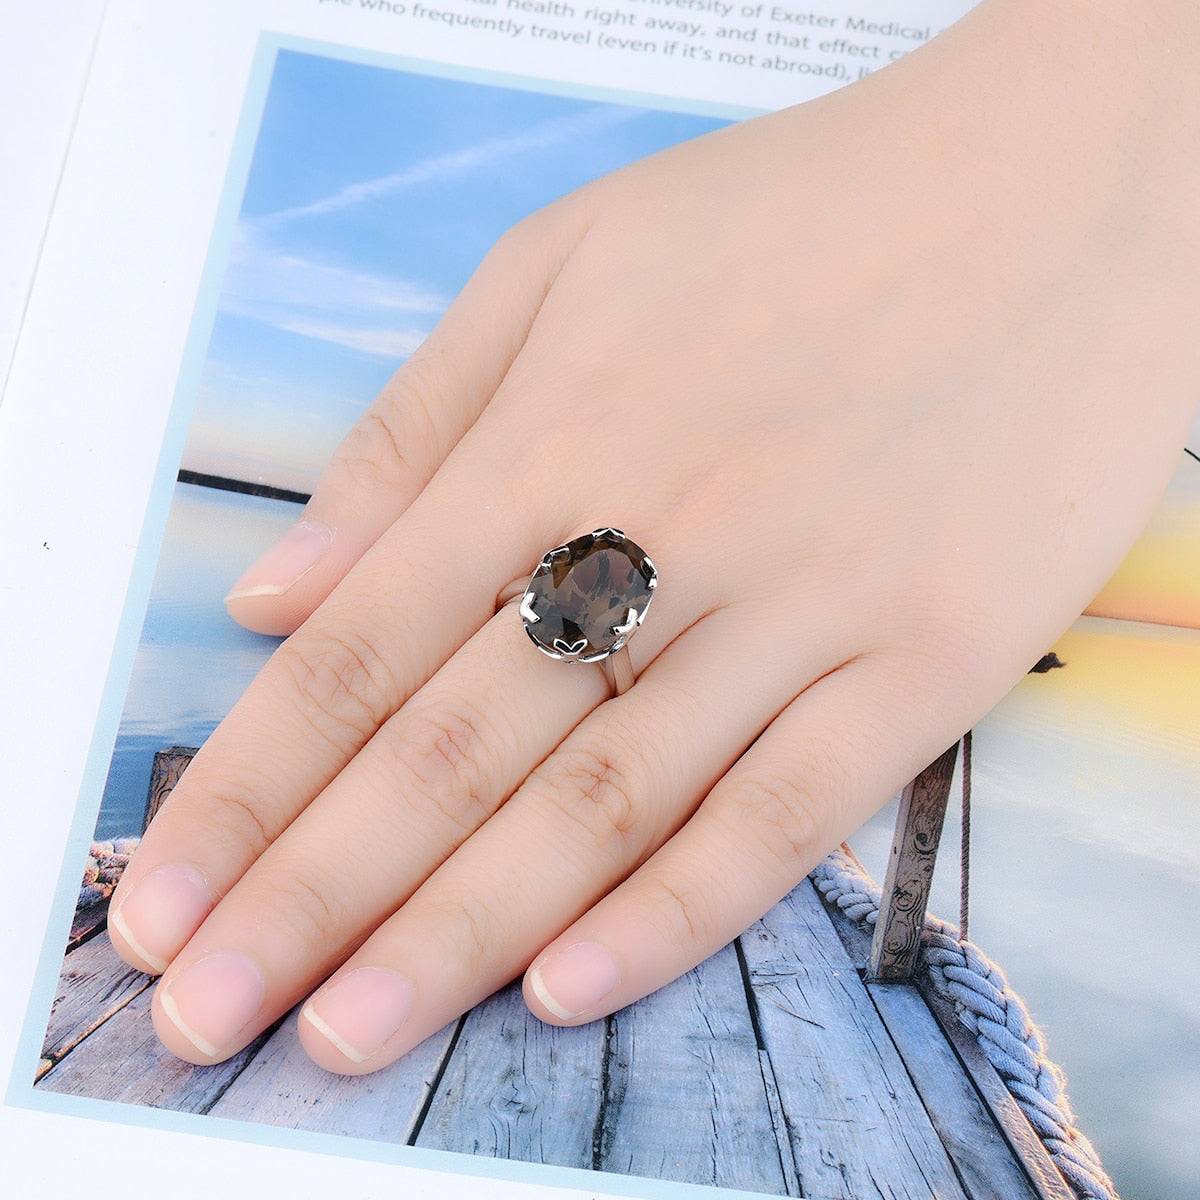 Natural Smoky Quarts Solid Sterling Silver Women Rings 11 Carats Brown Crystal Classic Simple Style Mother's Day Birthday Gifts